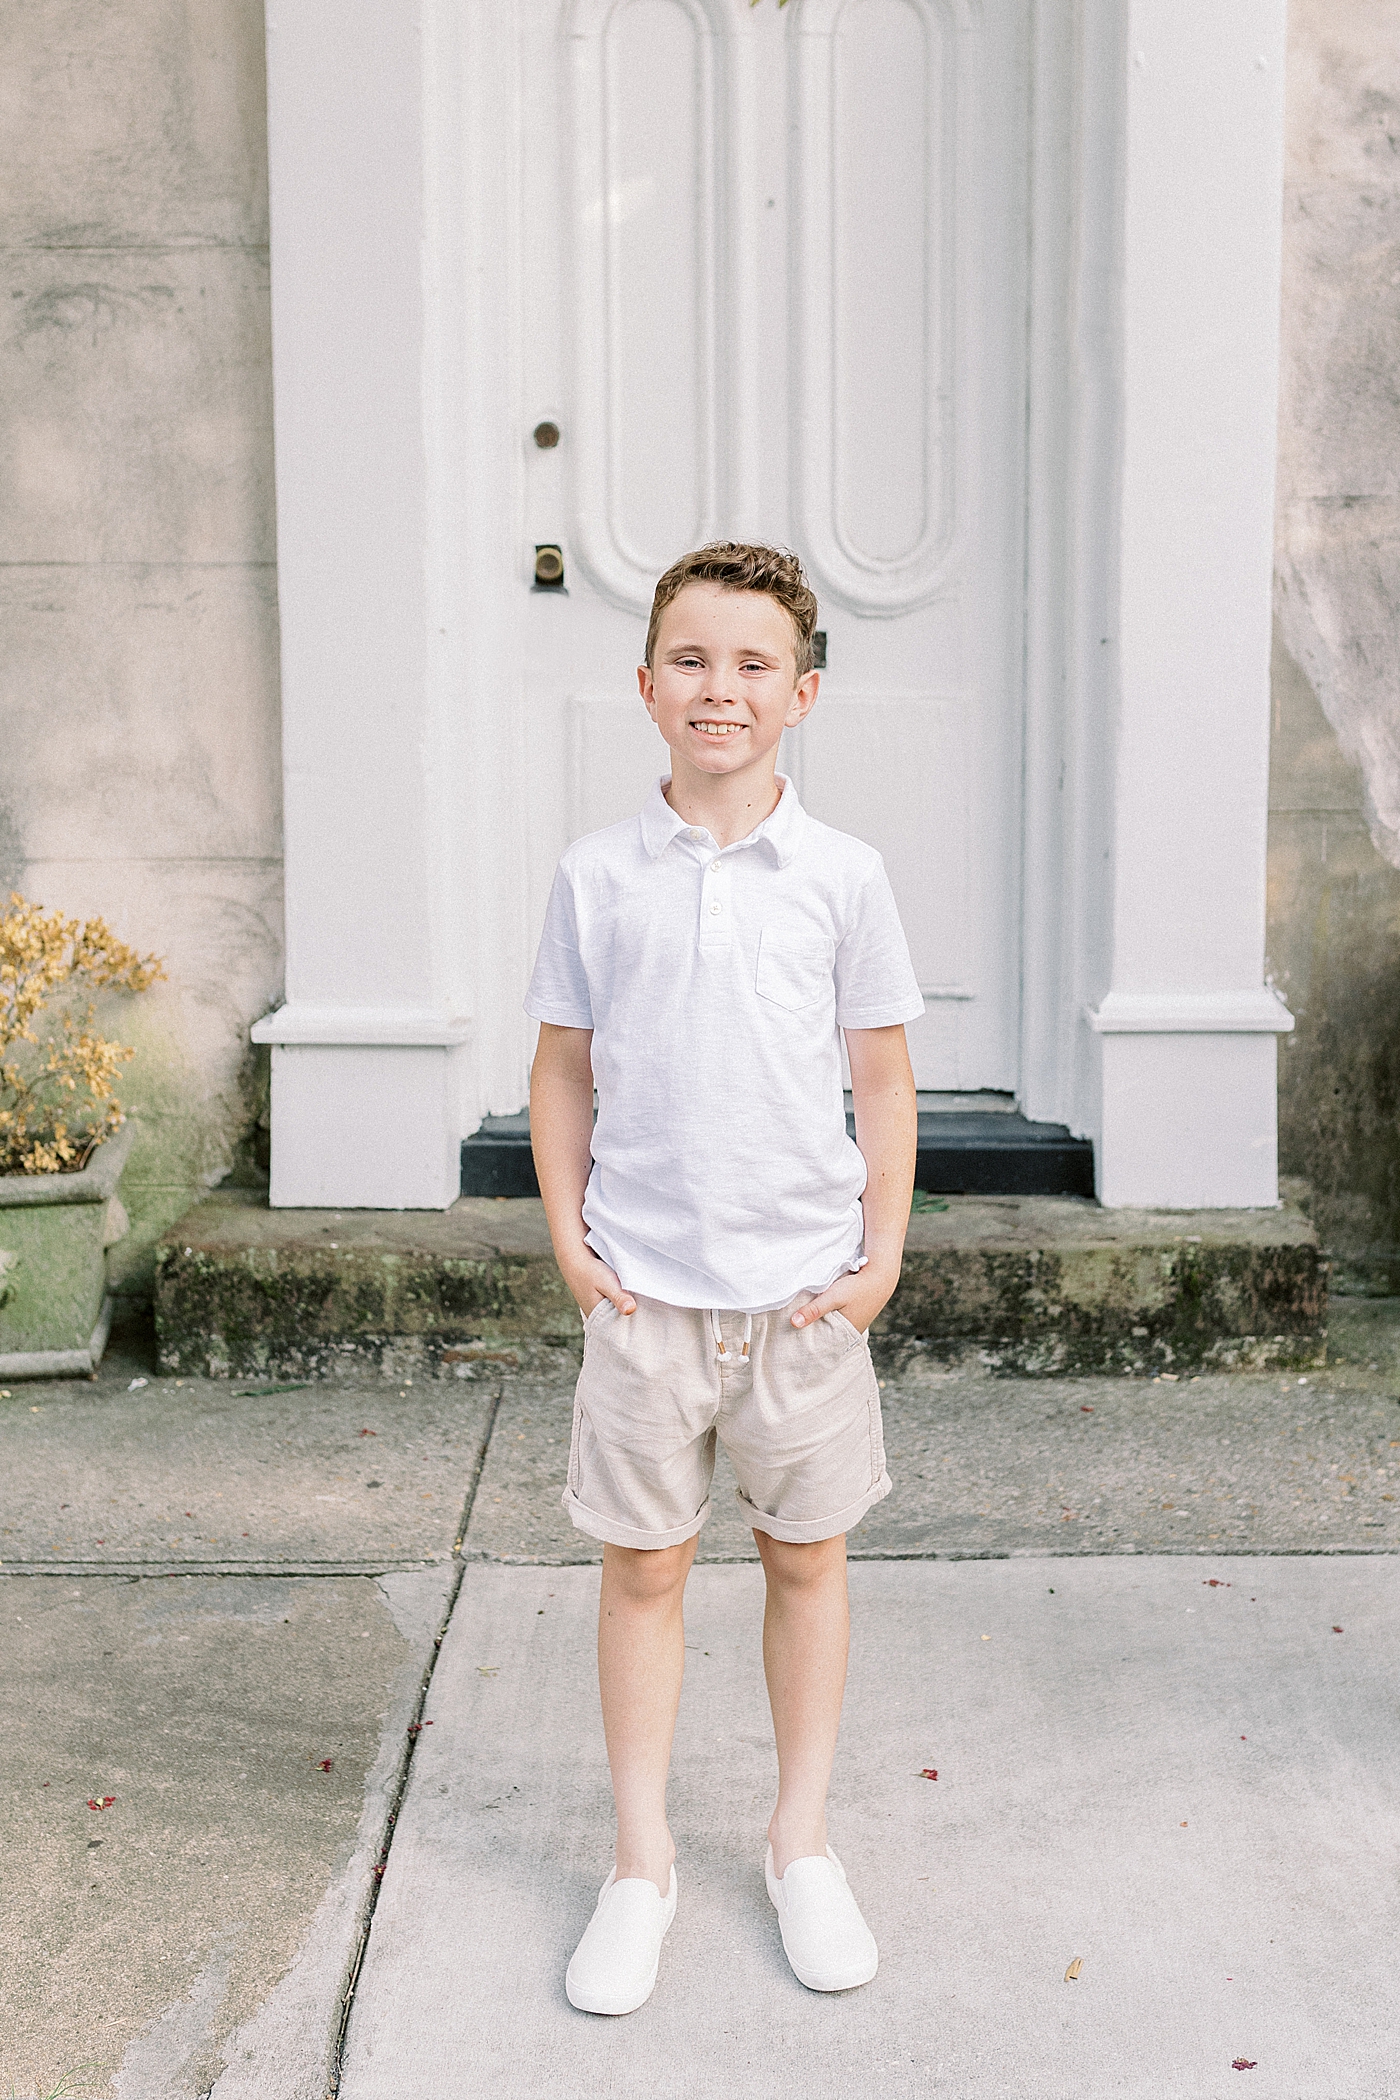 Little boy in a white shirt with his hands in his pockets | Photo by Caitlyn Motycka Photography